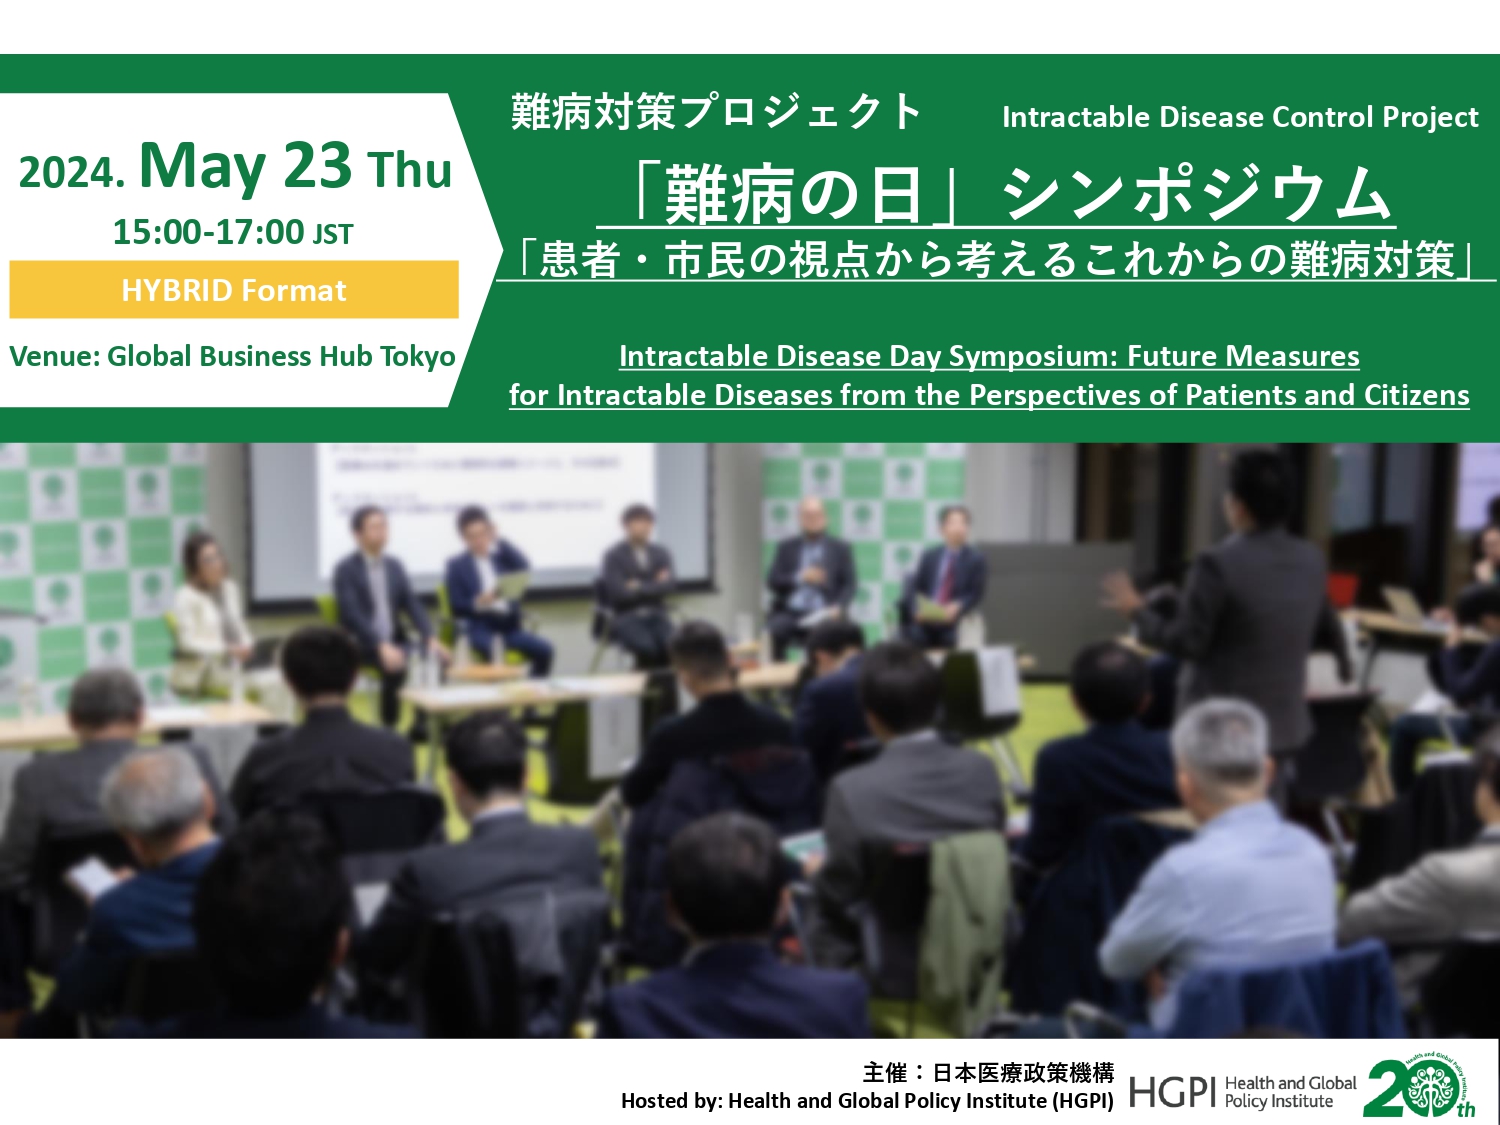 [Registration Open] (Hybrid Format) Intractable Disease Day Symposium: Future Measures for Intractable Diseases from the Perspectives of Patients and Citizens (May, 23 2024)